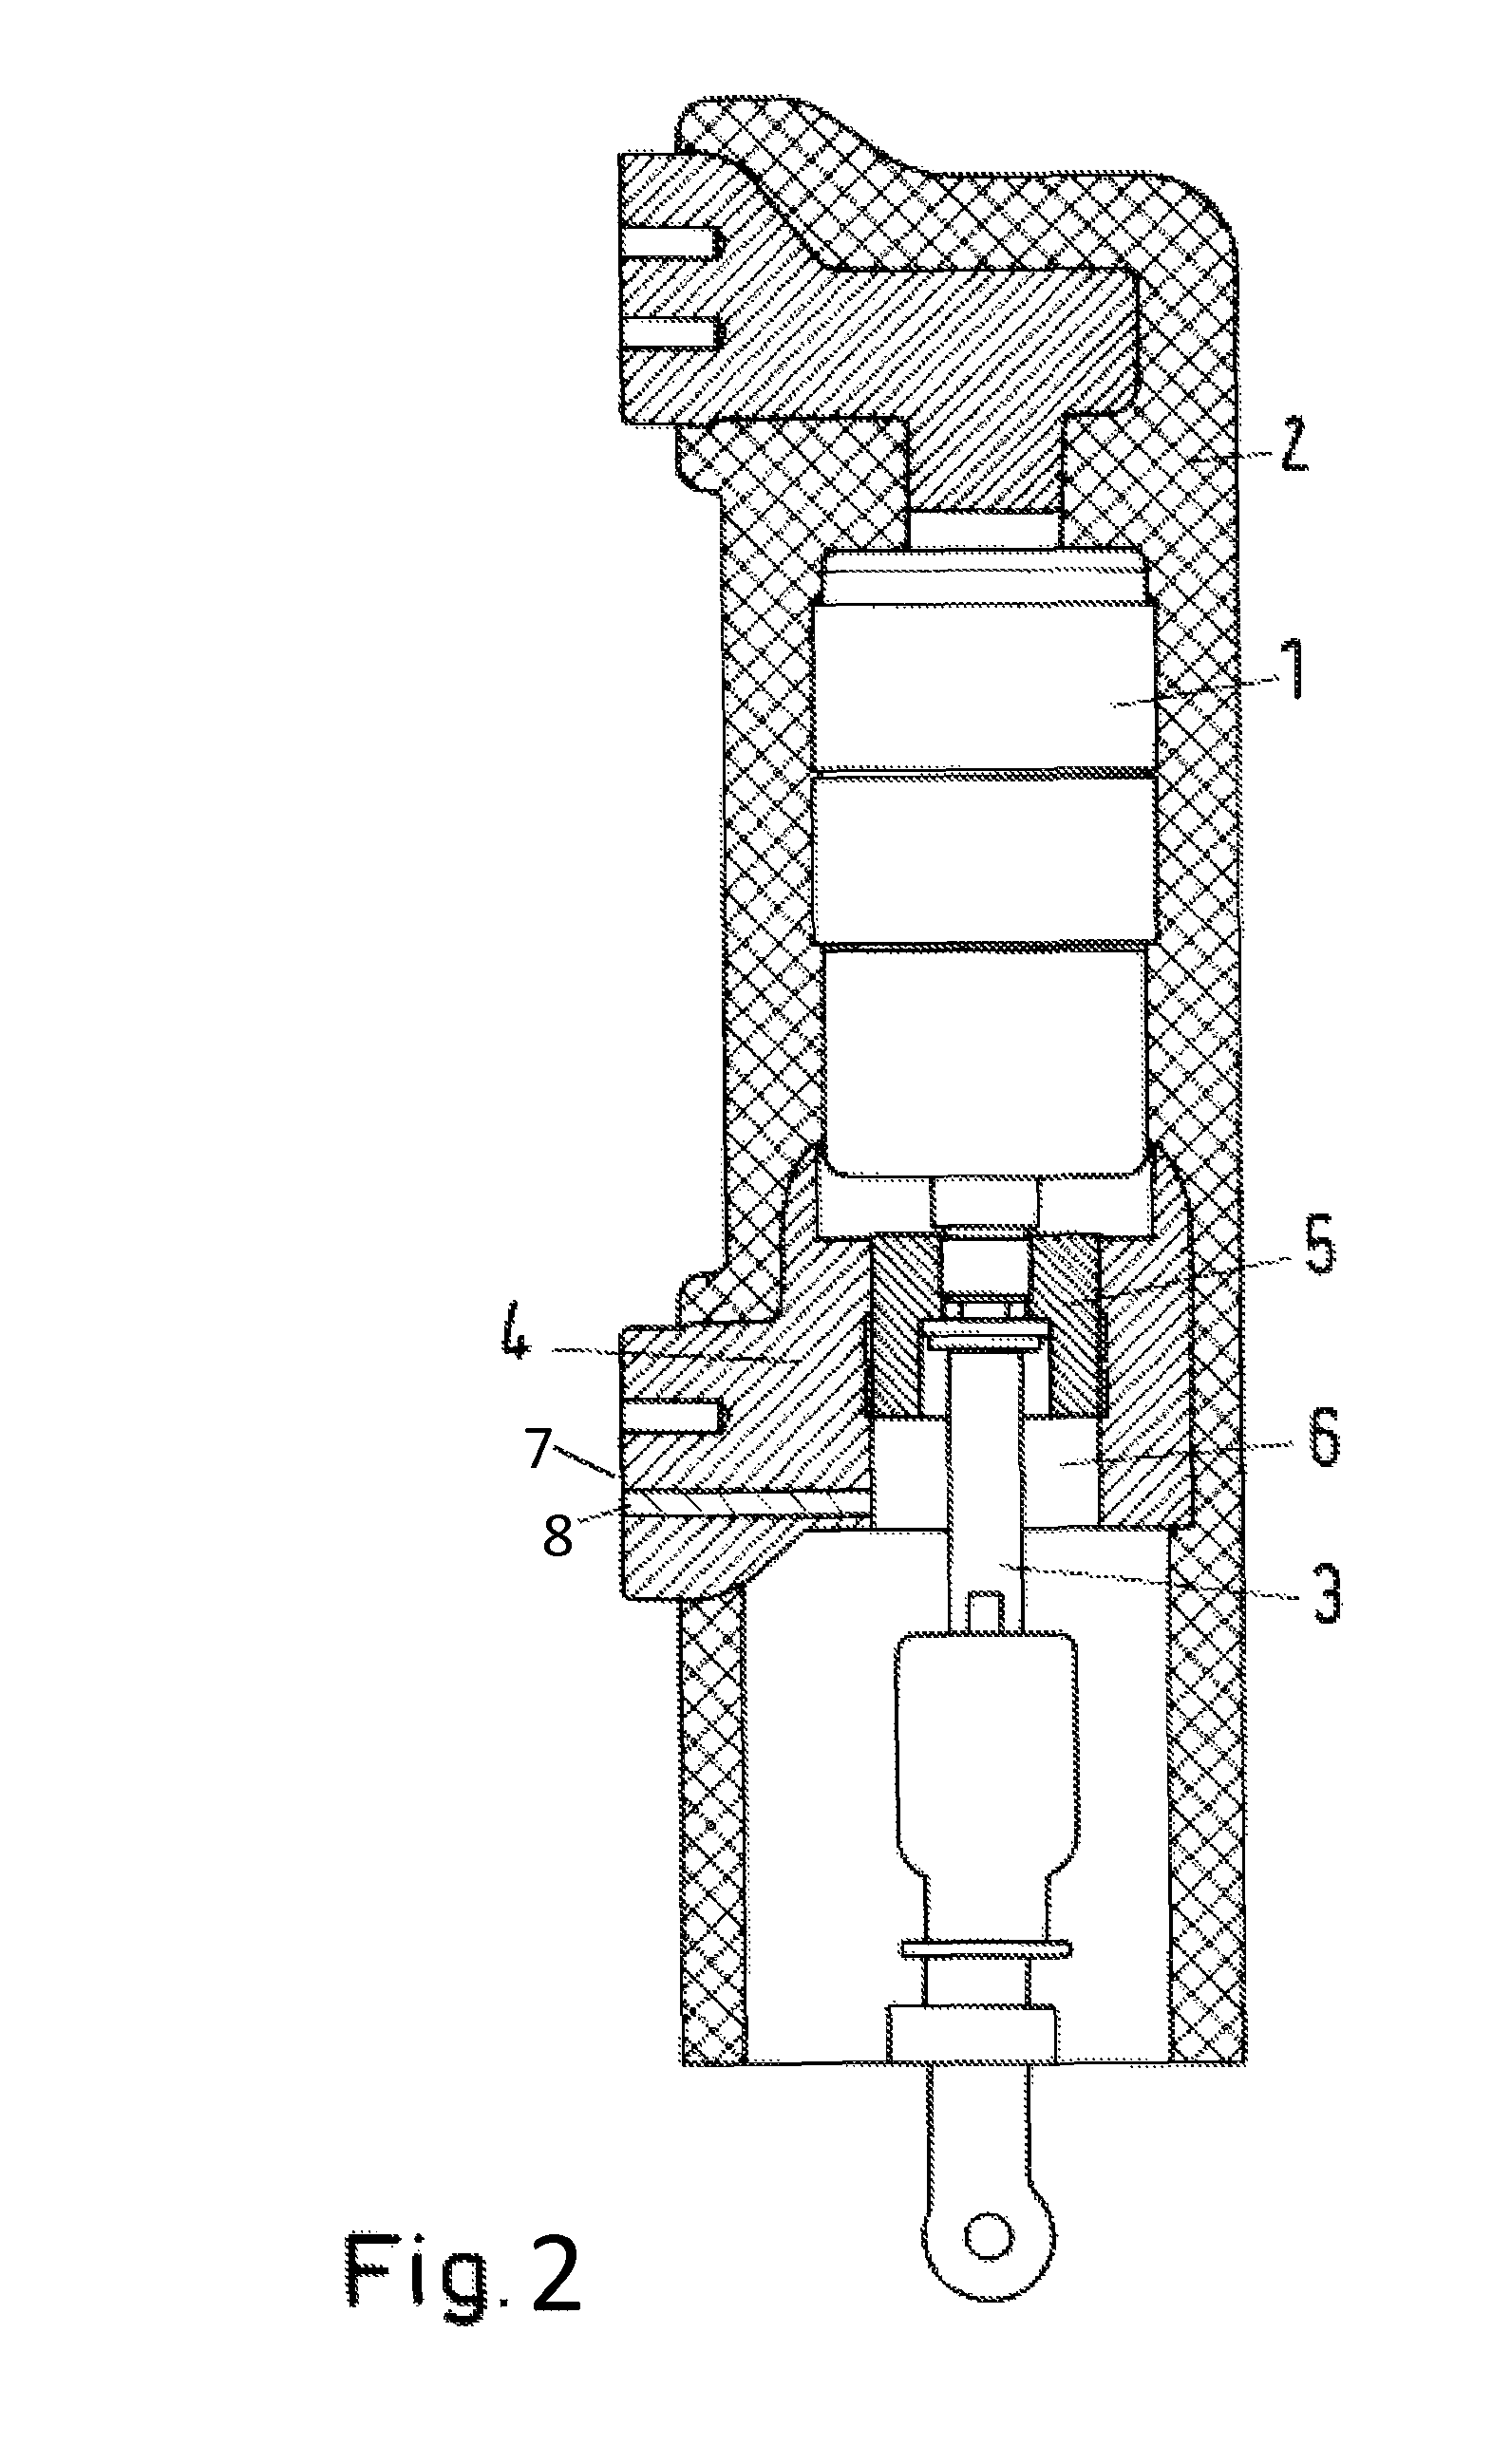 Pole part of a medium-voltage switching device